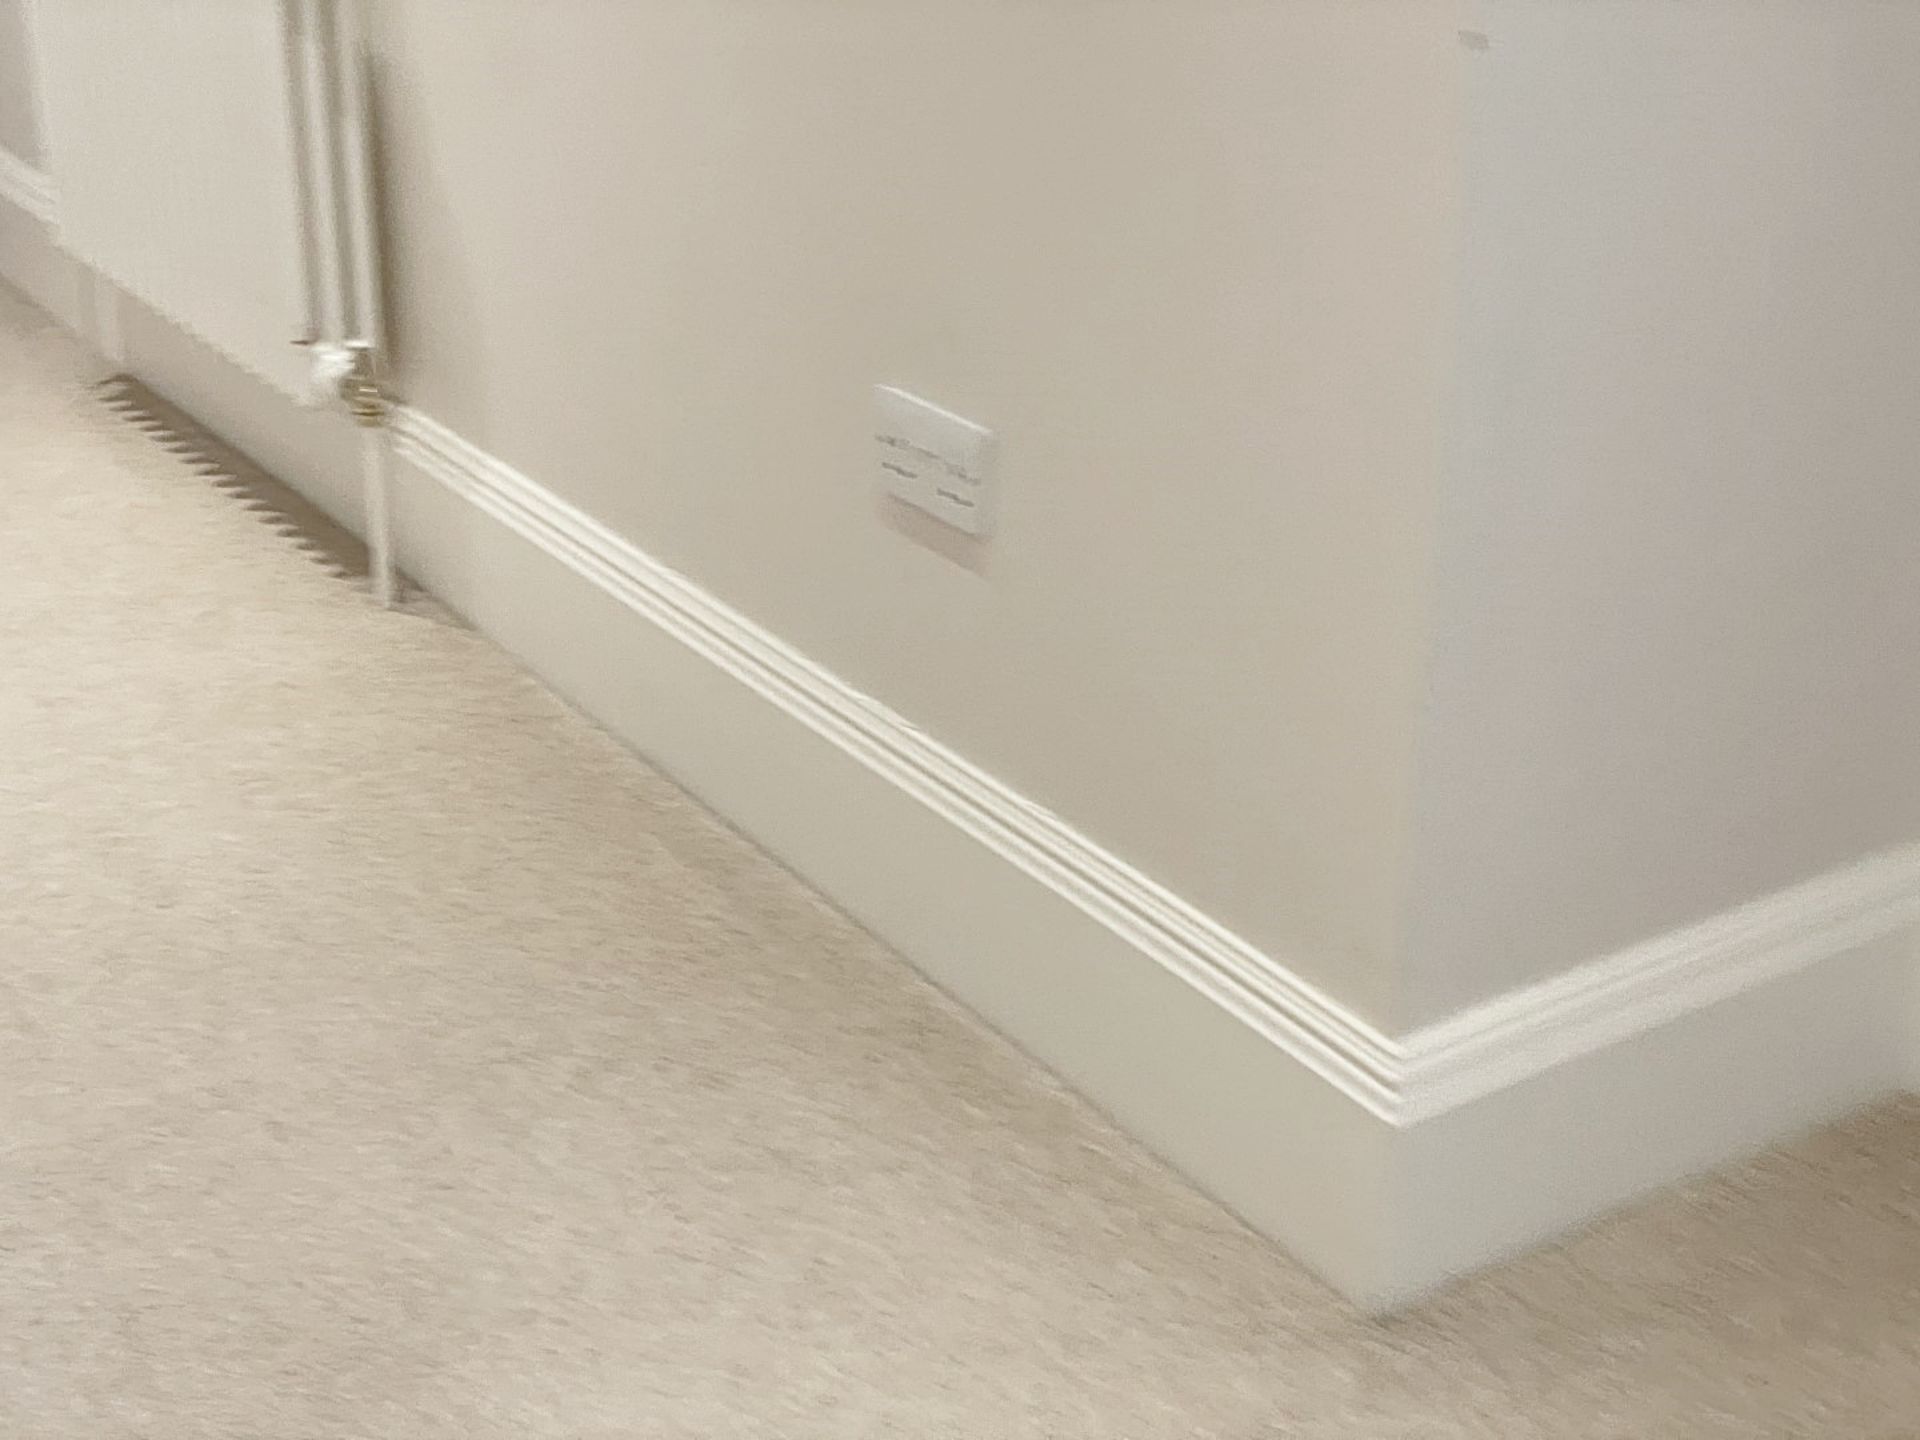 Approximately 16-Metres of Painted Timber Wooden Skirting Boards, In White - Ref: PAN283 / Bed4 - - Image 6 of 6